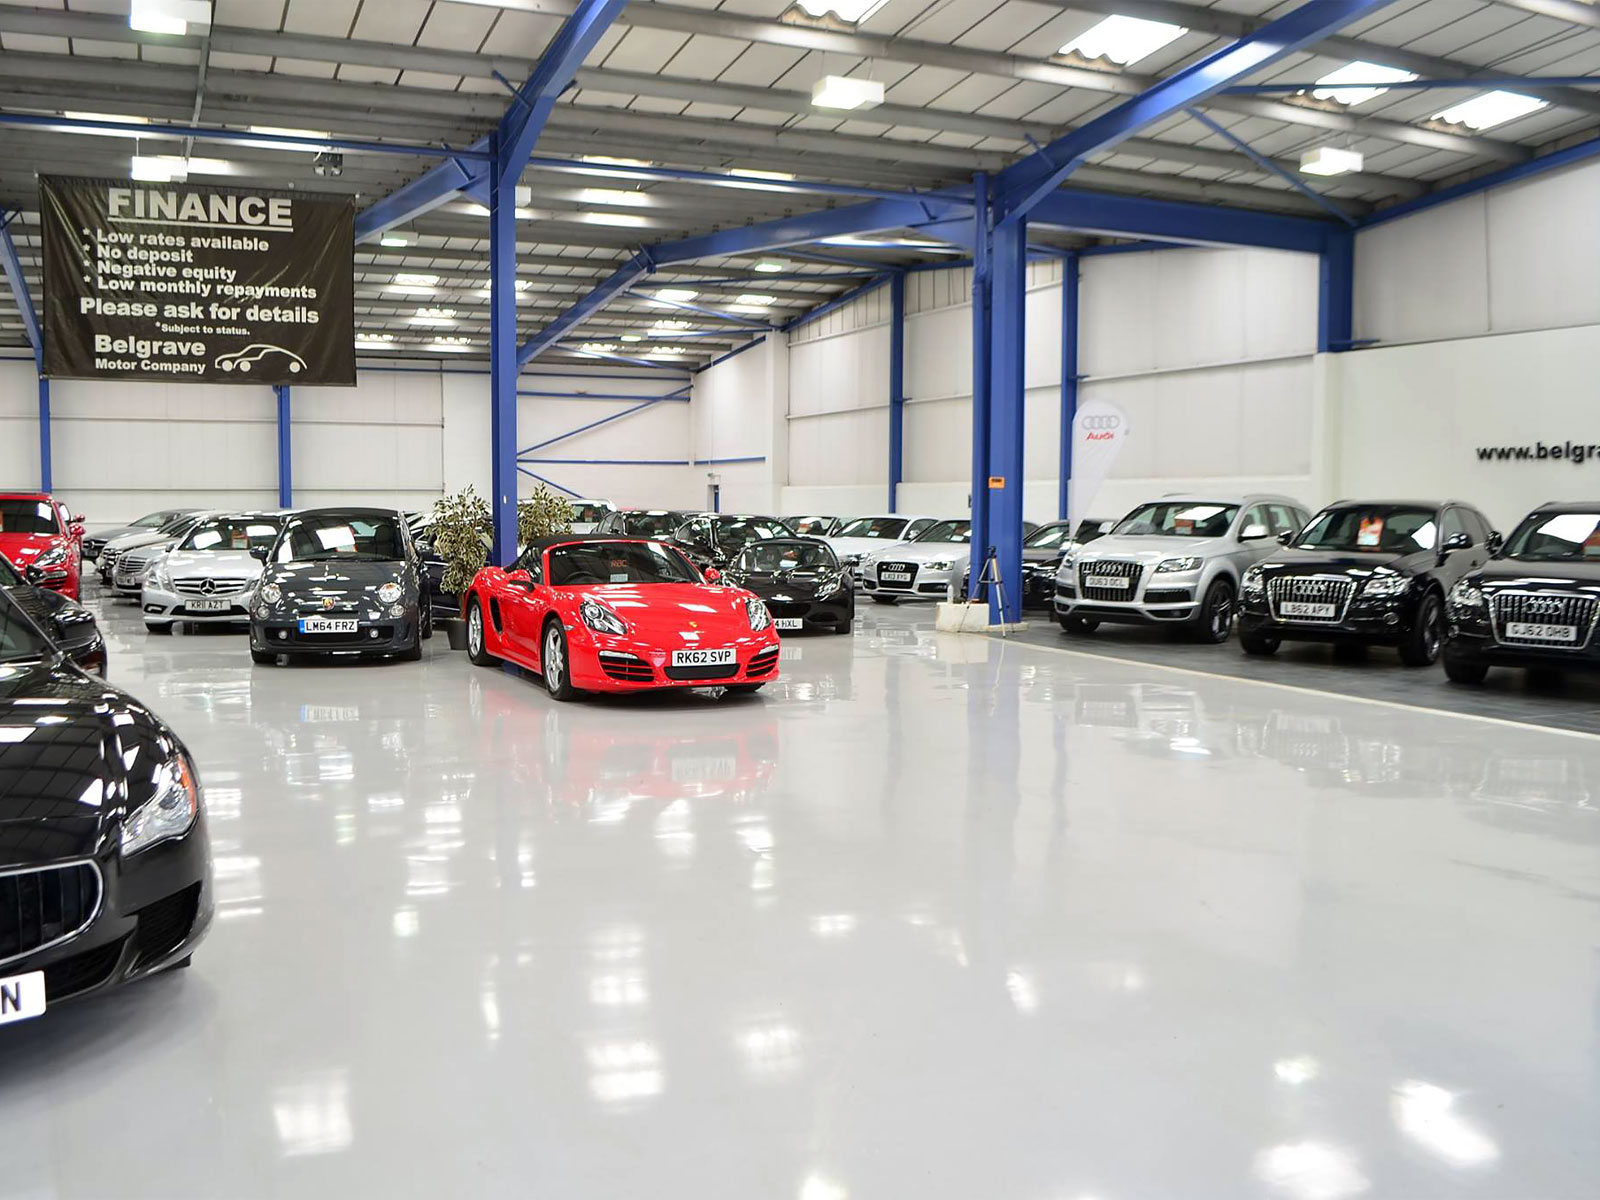 Welcome To Belgrave Motor Company - Sheffield, South Yorkshire